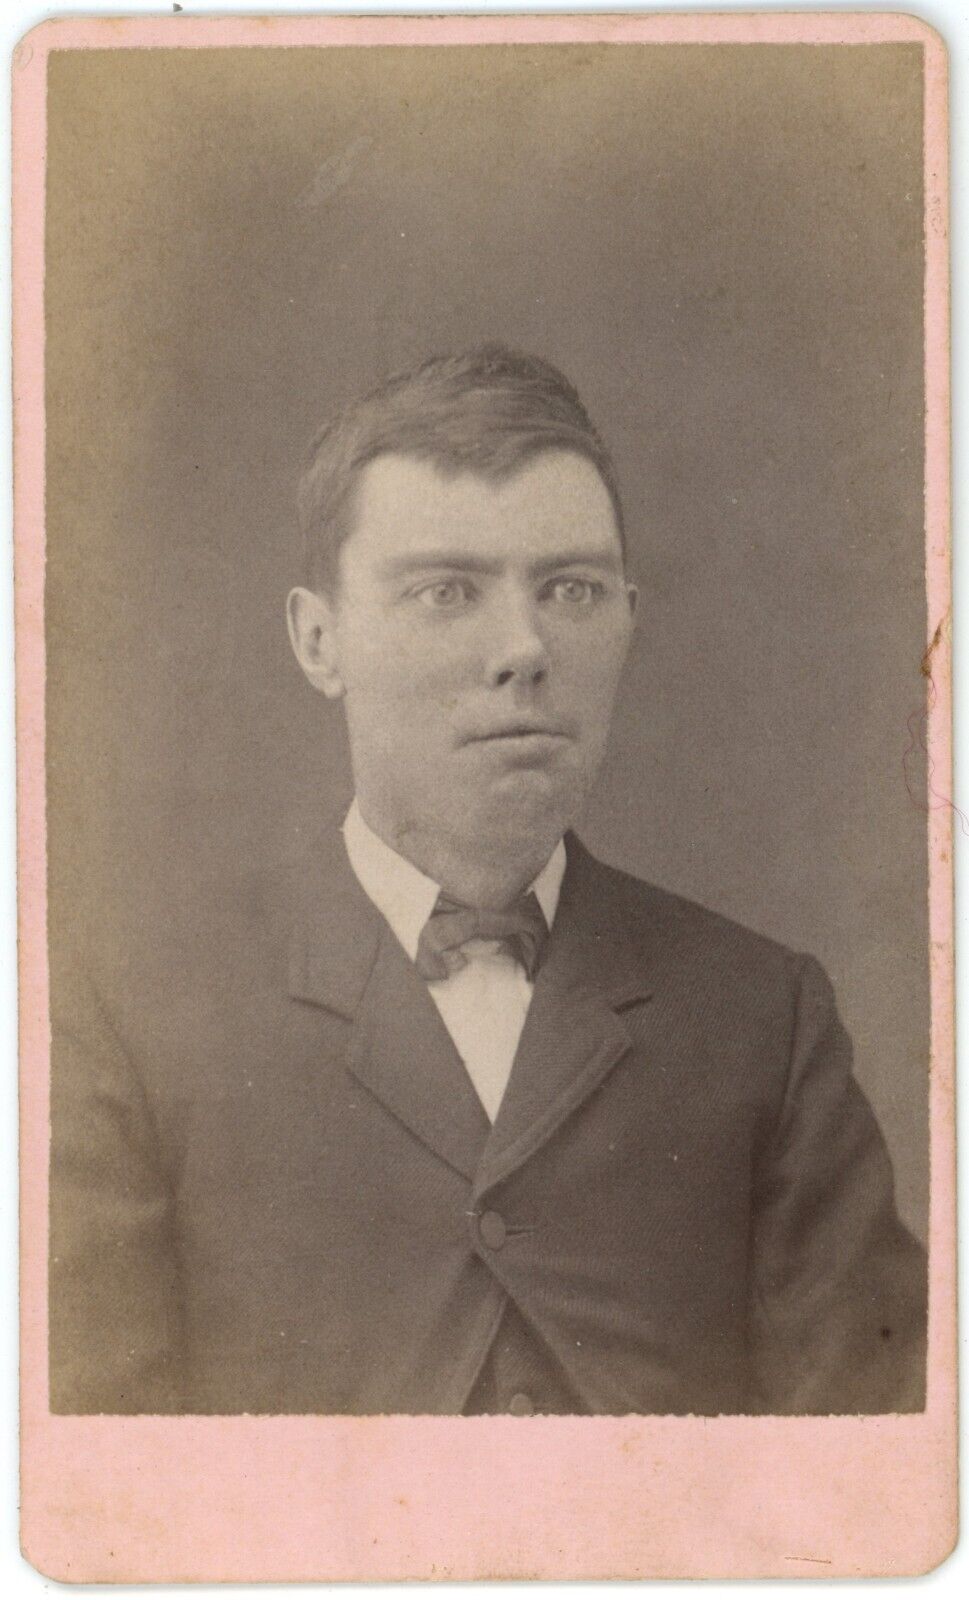 CIRCA 1880\'S ANTIQUE CDV OF ODD LOOKING YOUNG MAN IN SUIT AND BOW TIE